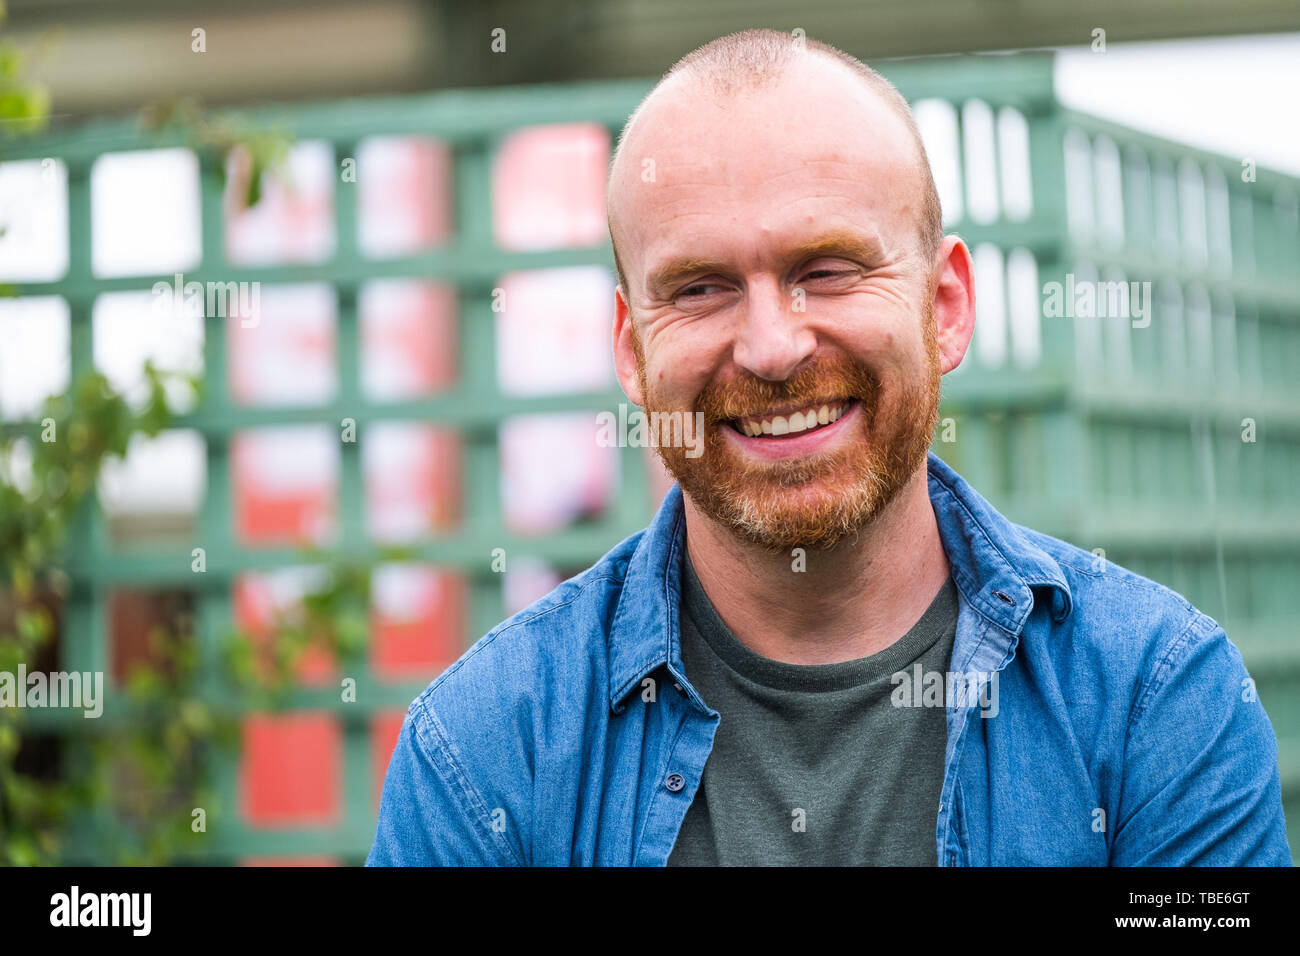 The Hay Festival, Hay on Wye, Wales UK , Saturday 01 June  2019.  Matt Haig , British novelist and journalist. Writer of  both fiction and non-fiction for children and adults, often in the speculative fiction genre. Appearing at the 2019 Hay Festival  The festival, now in its 32nd year, held annually in the small town of Hay on Wye on the Wales - England border,  attracts the finest writers, politicians and intellectuals from  across the globe for 10 days of talks and discussions, celebrating the best of the written word and critical debate  Photo © Keith Morris / Alamy Live News Stock Photo